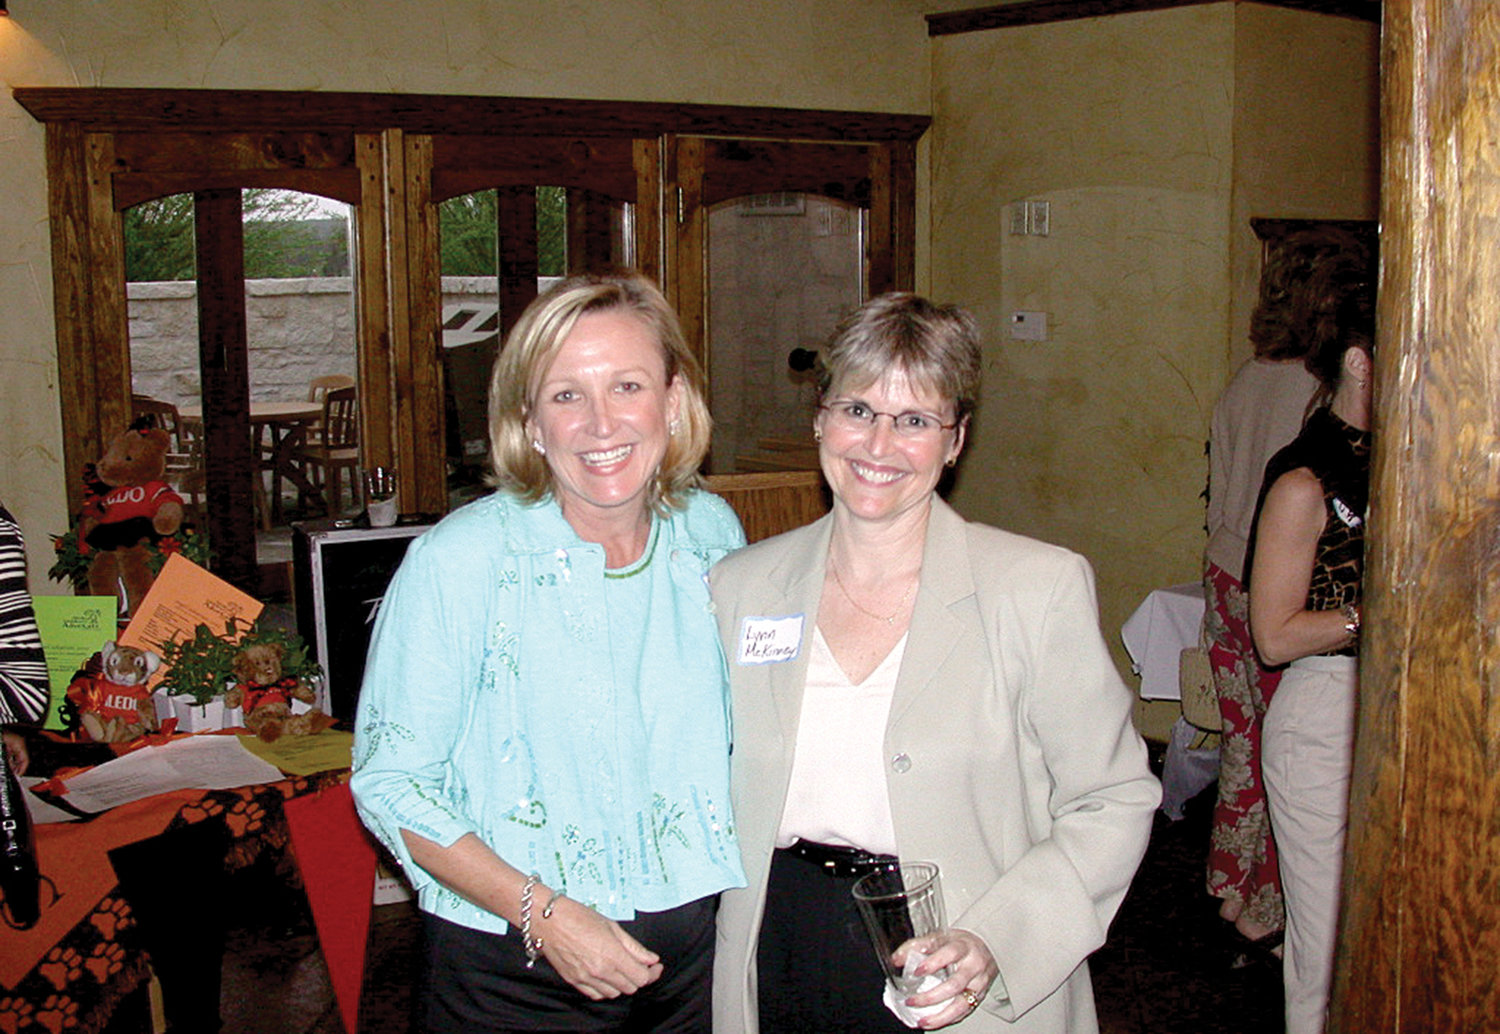 Pat Johnson and Lynn McKinney are shown at the inaugural formation meeting of Aledo AdvoCats in 2002.